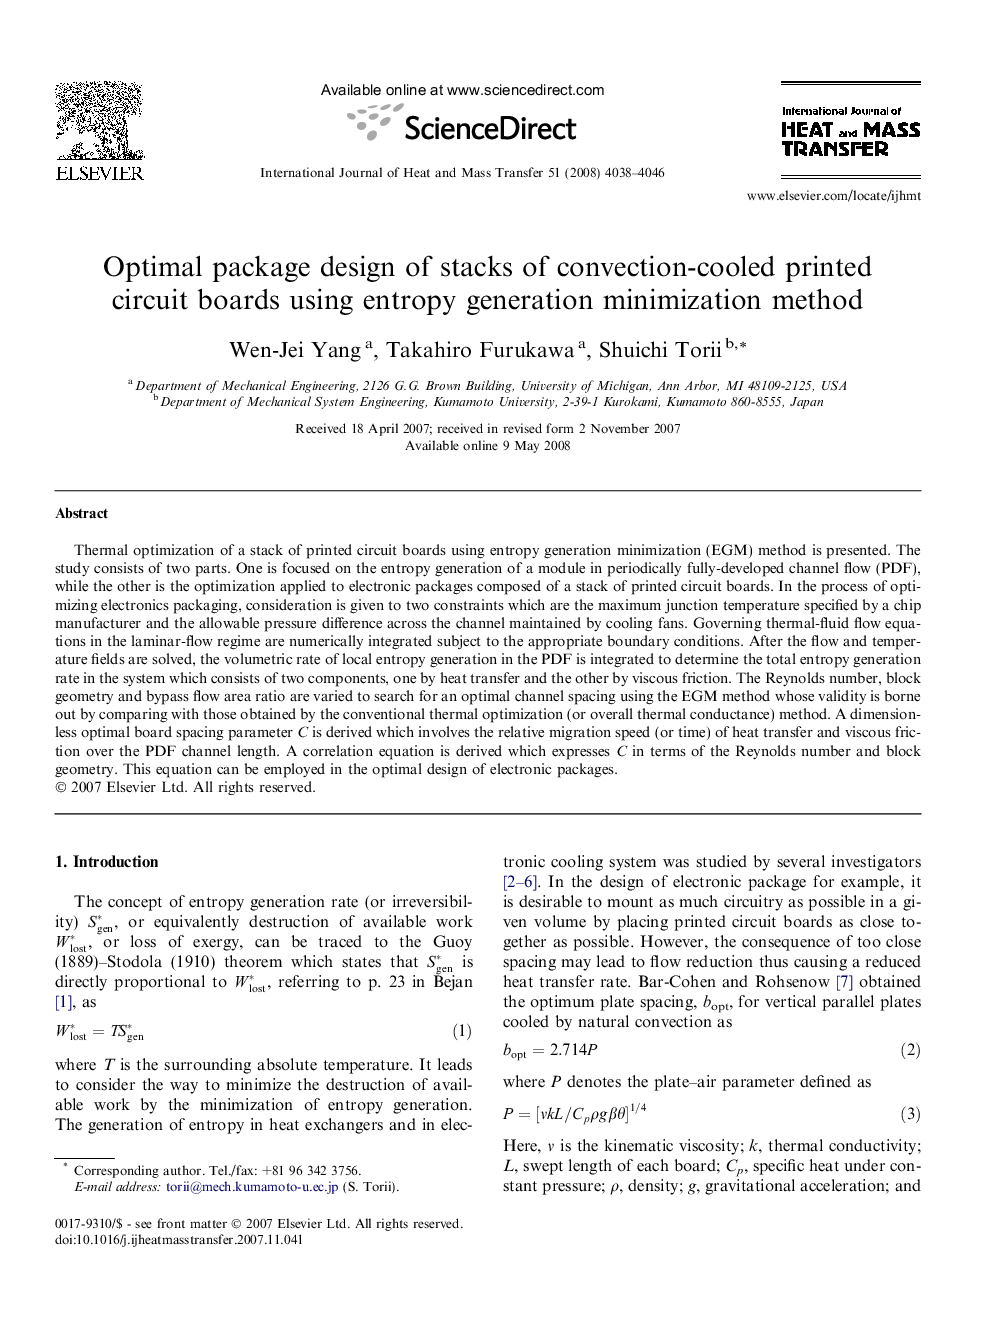 Optimal package design of stacks of convection-cooled printed circuit boards using entropy generation minimization method